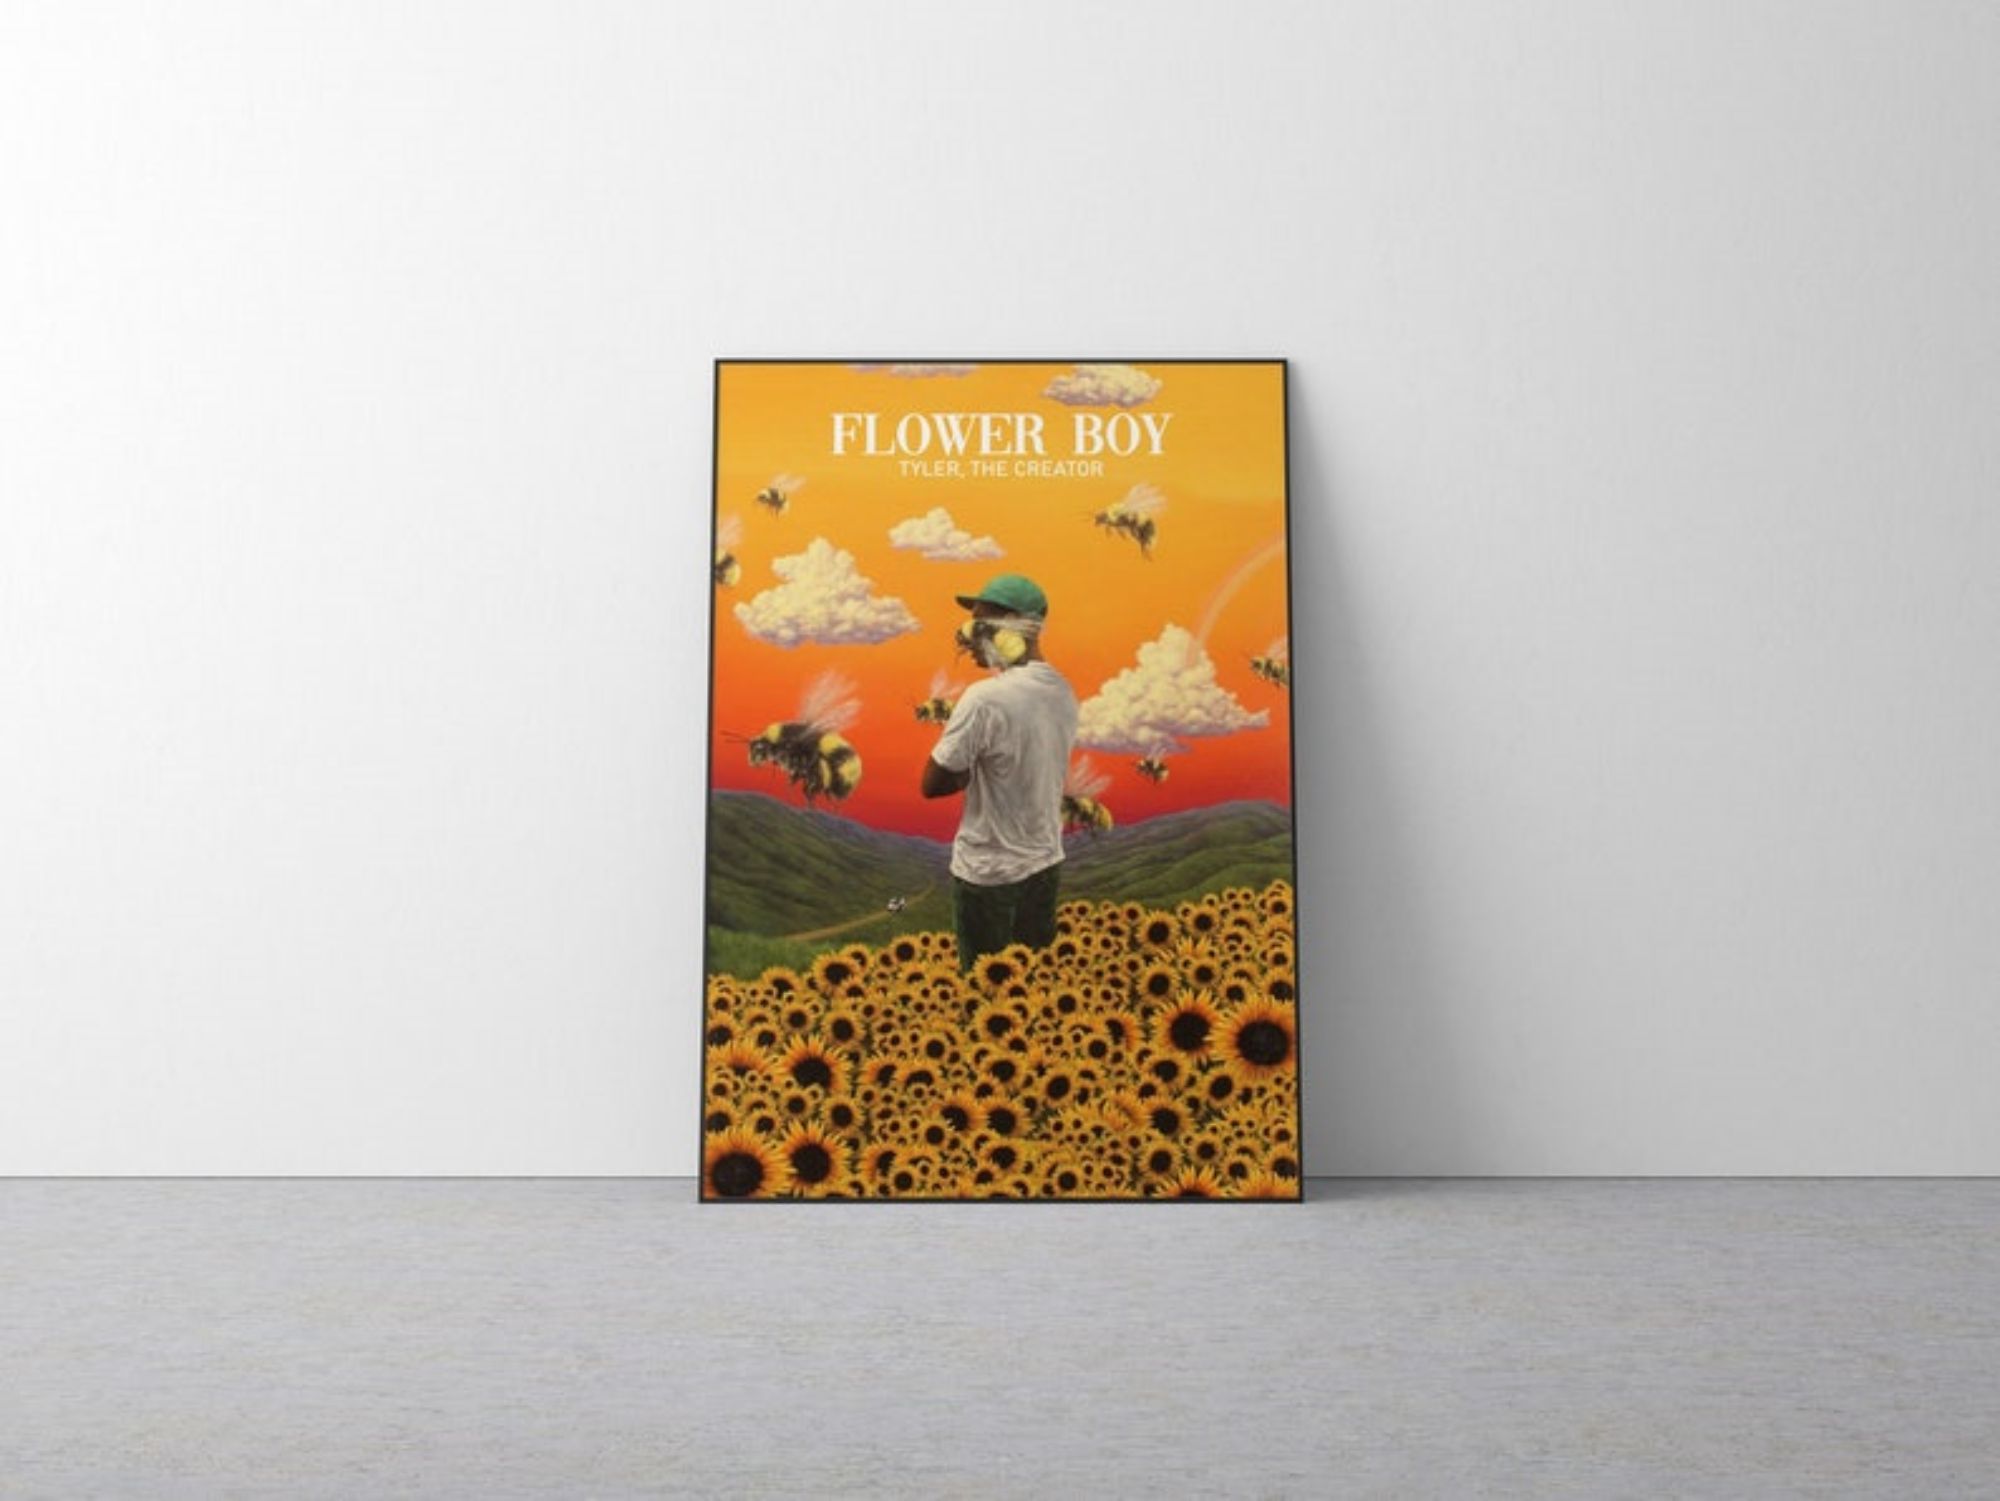 Apeasran Tyler The Creator Poster Call Me If You Get Lost Poster Wolf Igor Flower Boy Music Album Poster Cover Signed Limited Poster Canvas Wall Art